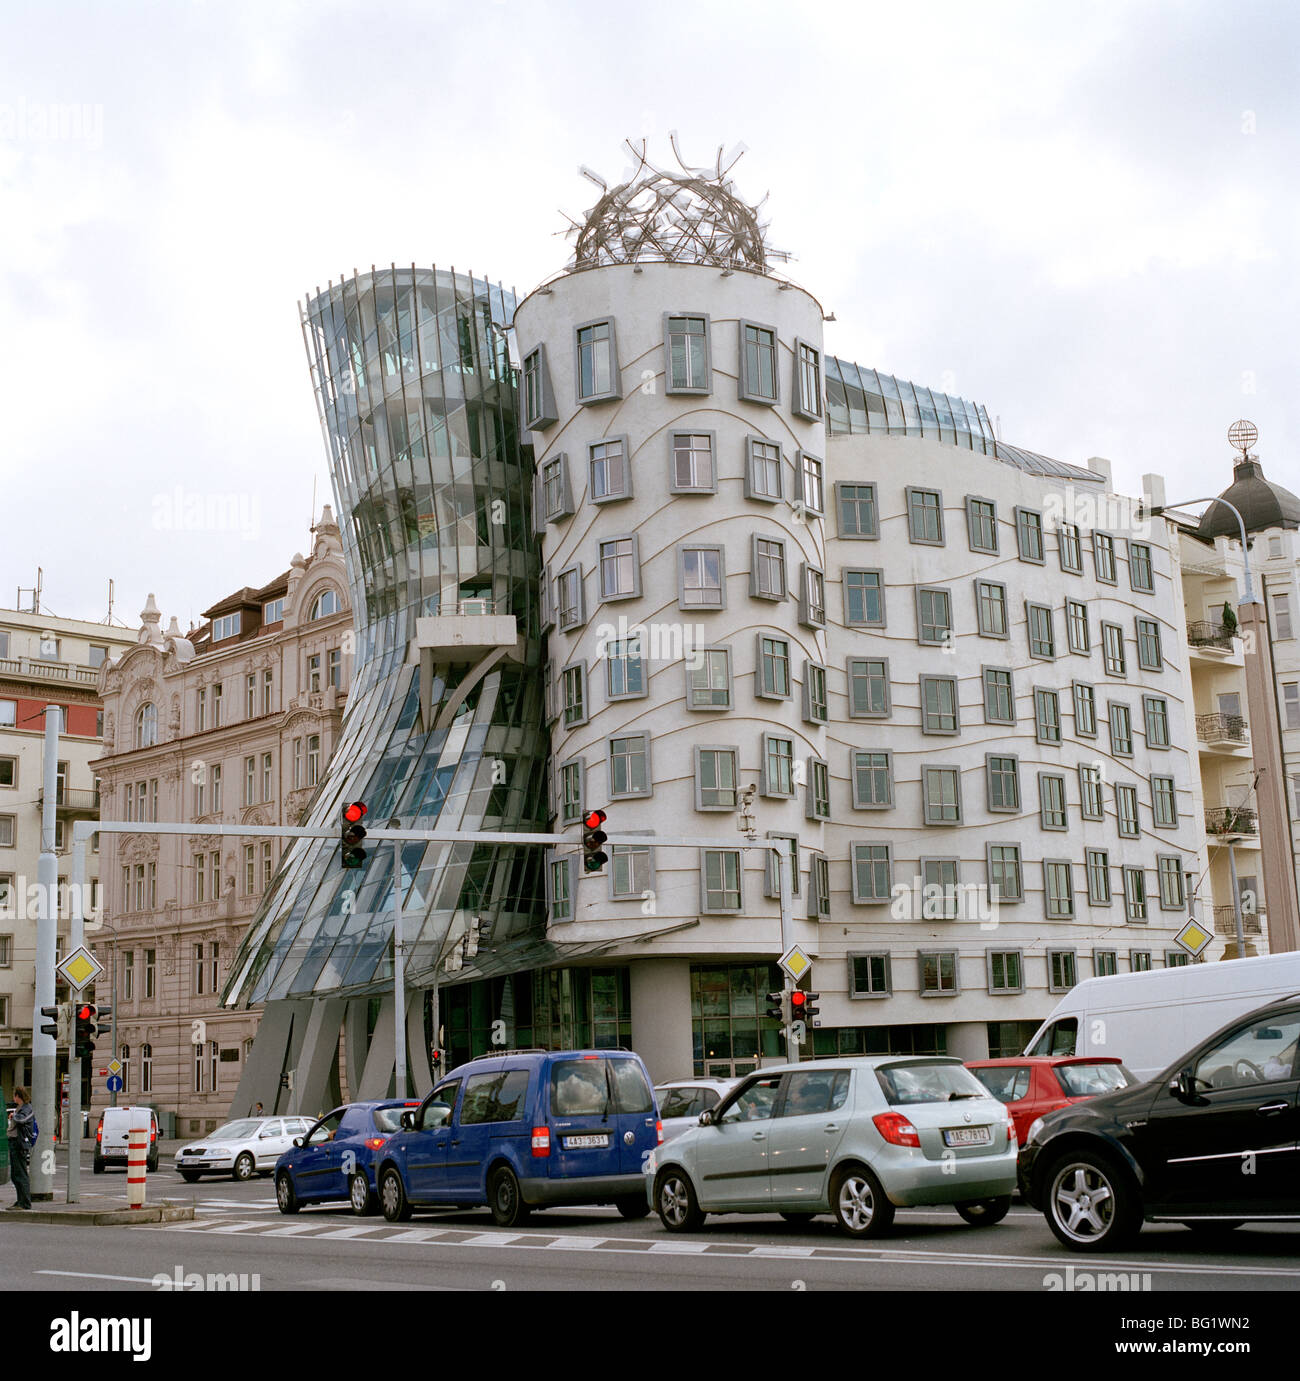 World Travel. The Frank Gehry Dancing House or Fred and Ginger Building in Nove Mesto in Prague in the Czech Republic in Eastern Europe. Culture Stock Photo